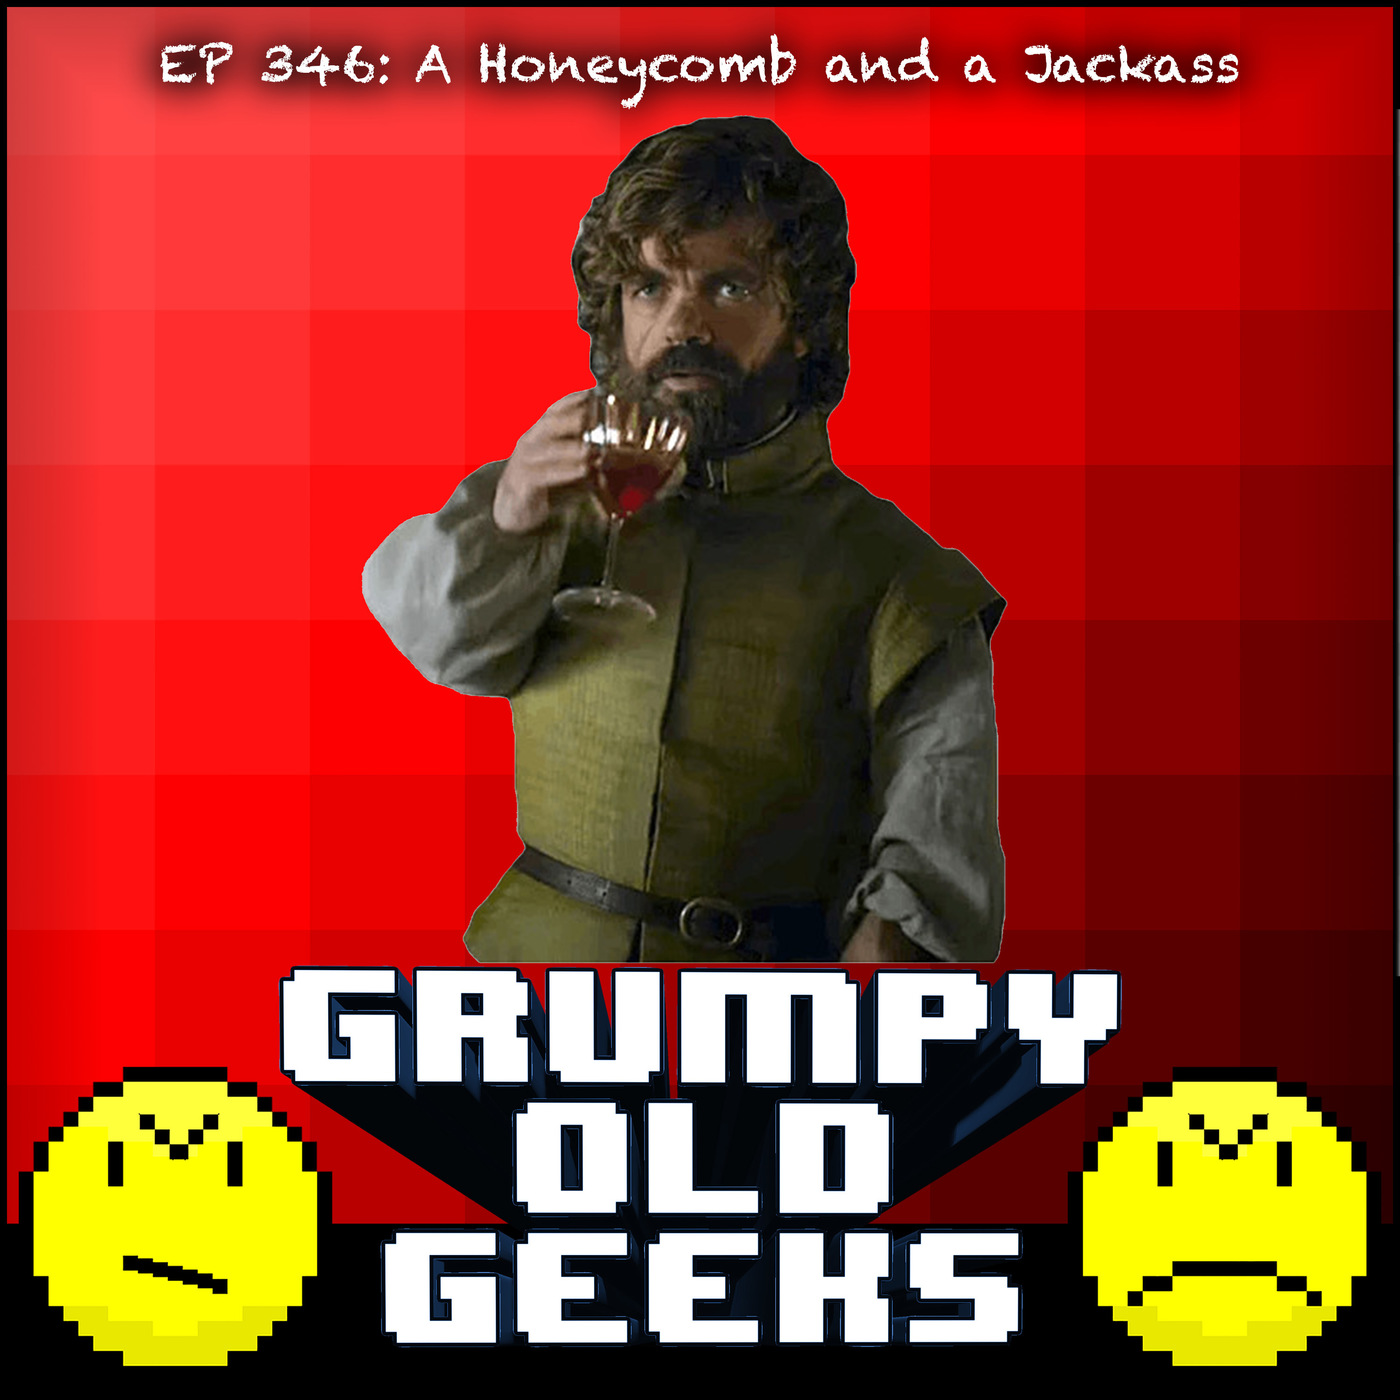 346: A Honeycomb and a Jackass Image